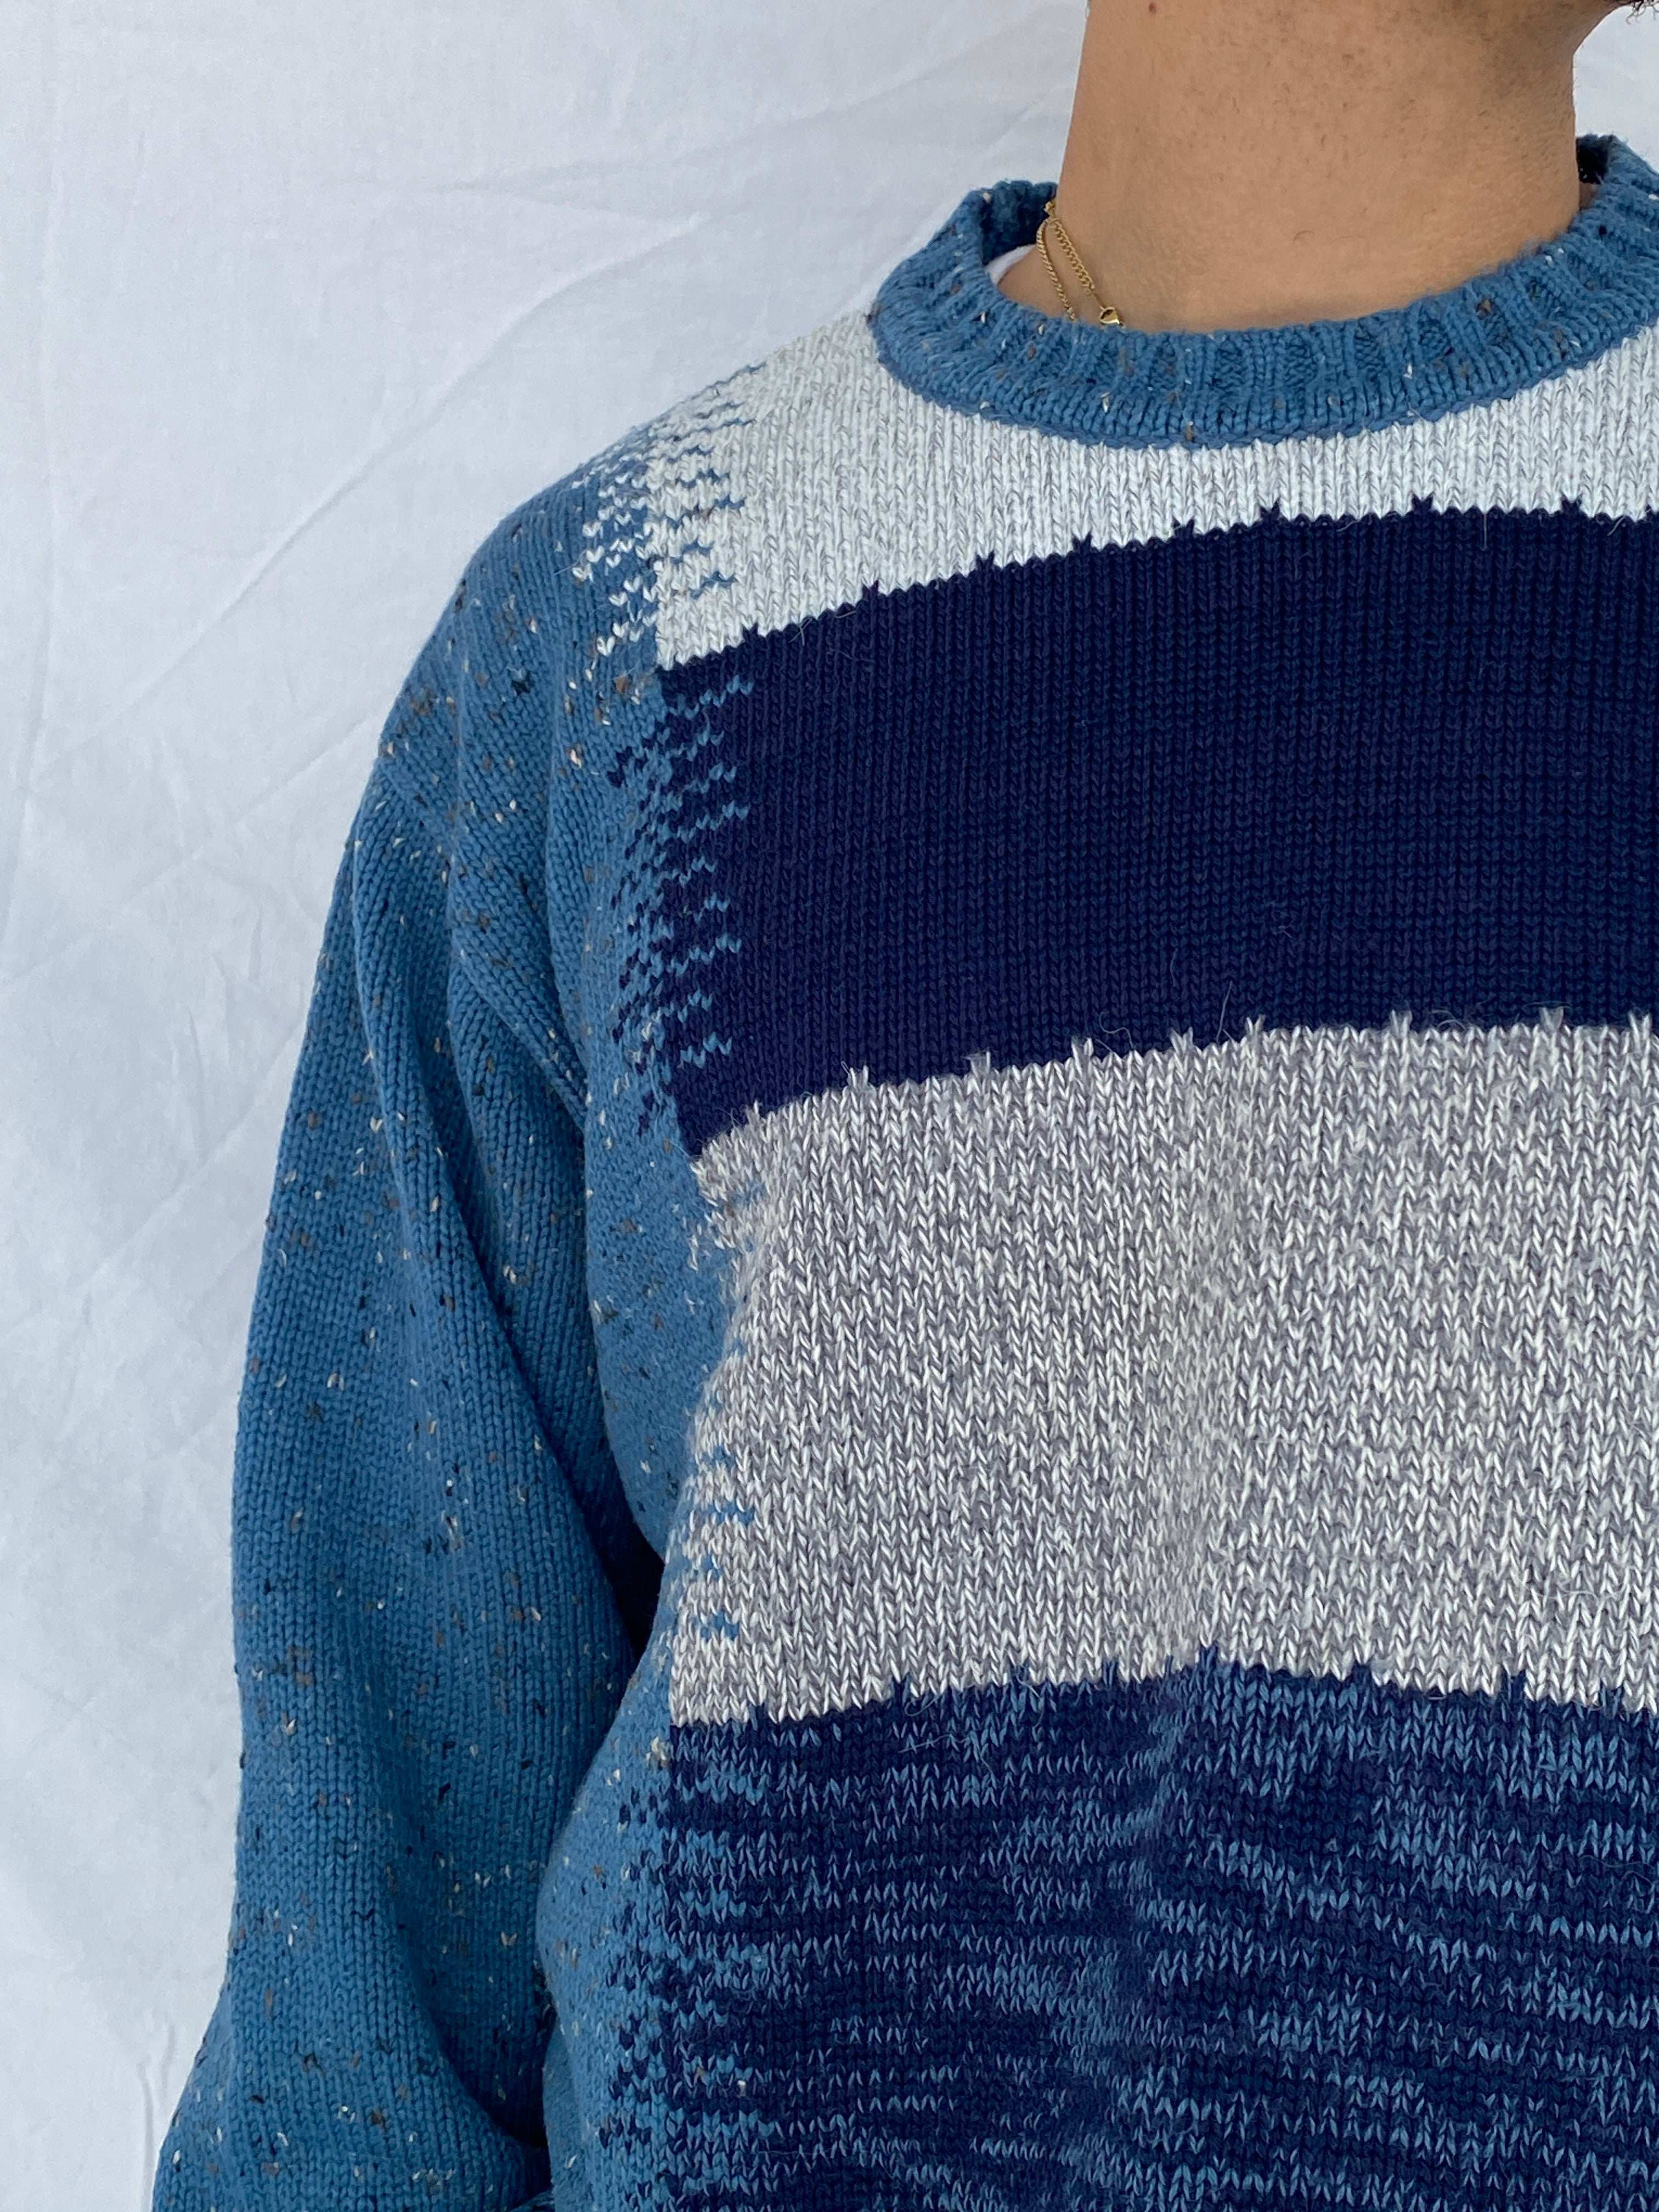 Sementa Collection‘s Blue Knitted Sweater - Size L - Balagan Vintage Sweater 80s, 90s, Abdullah, knitted sweater, vintage sweater, winter